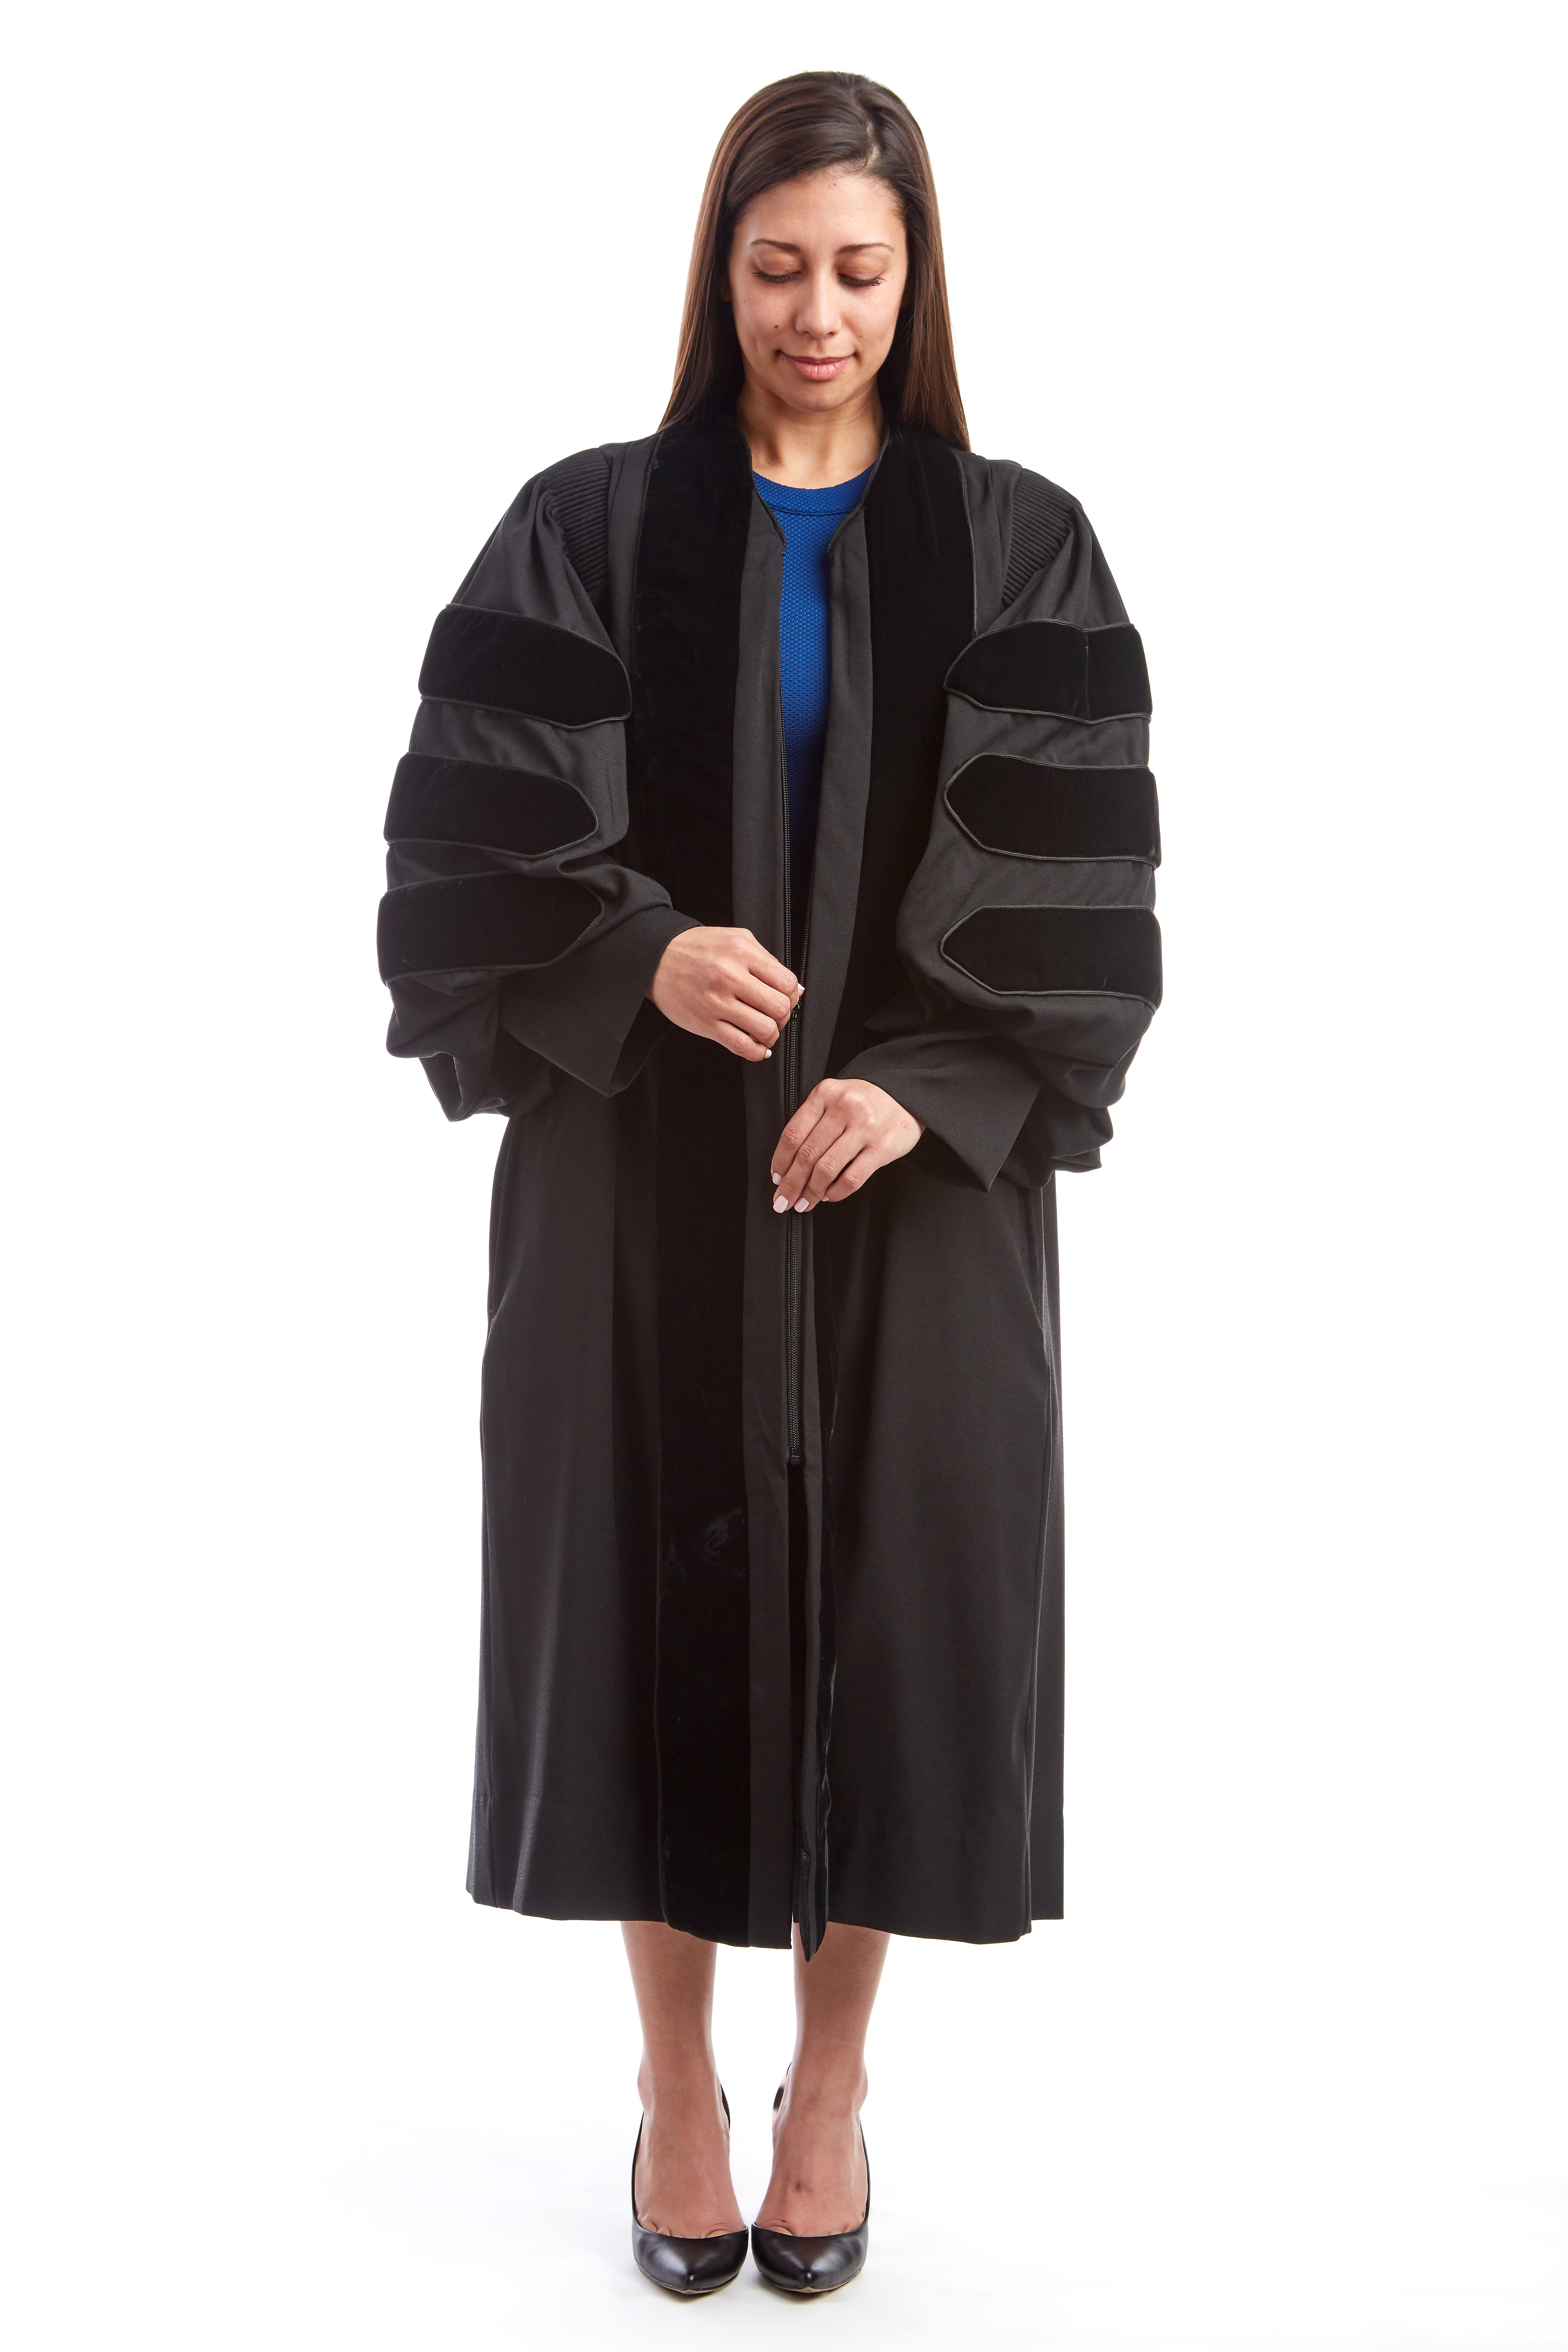 Premium Black Doctoral Gown with Black Piping for Graduation 